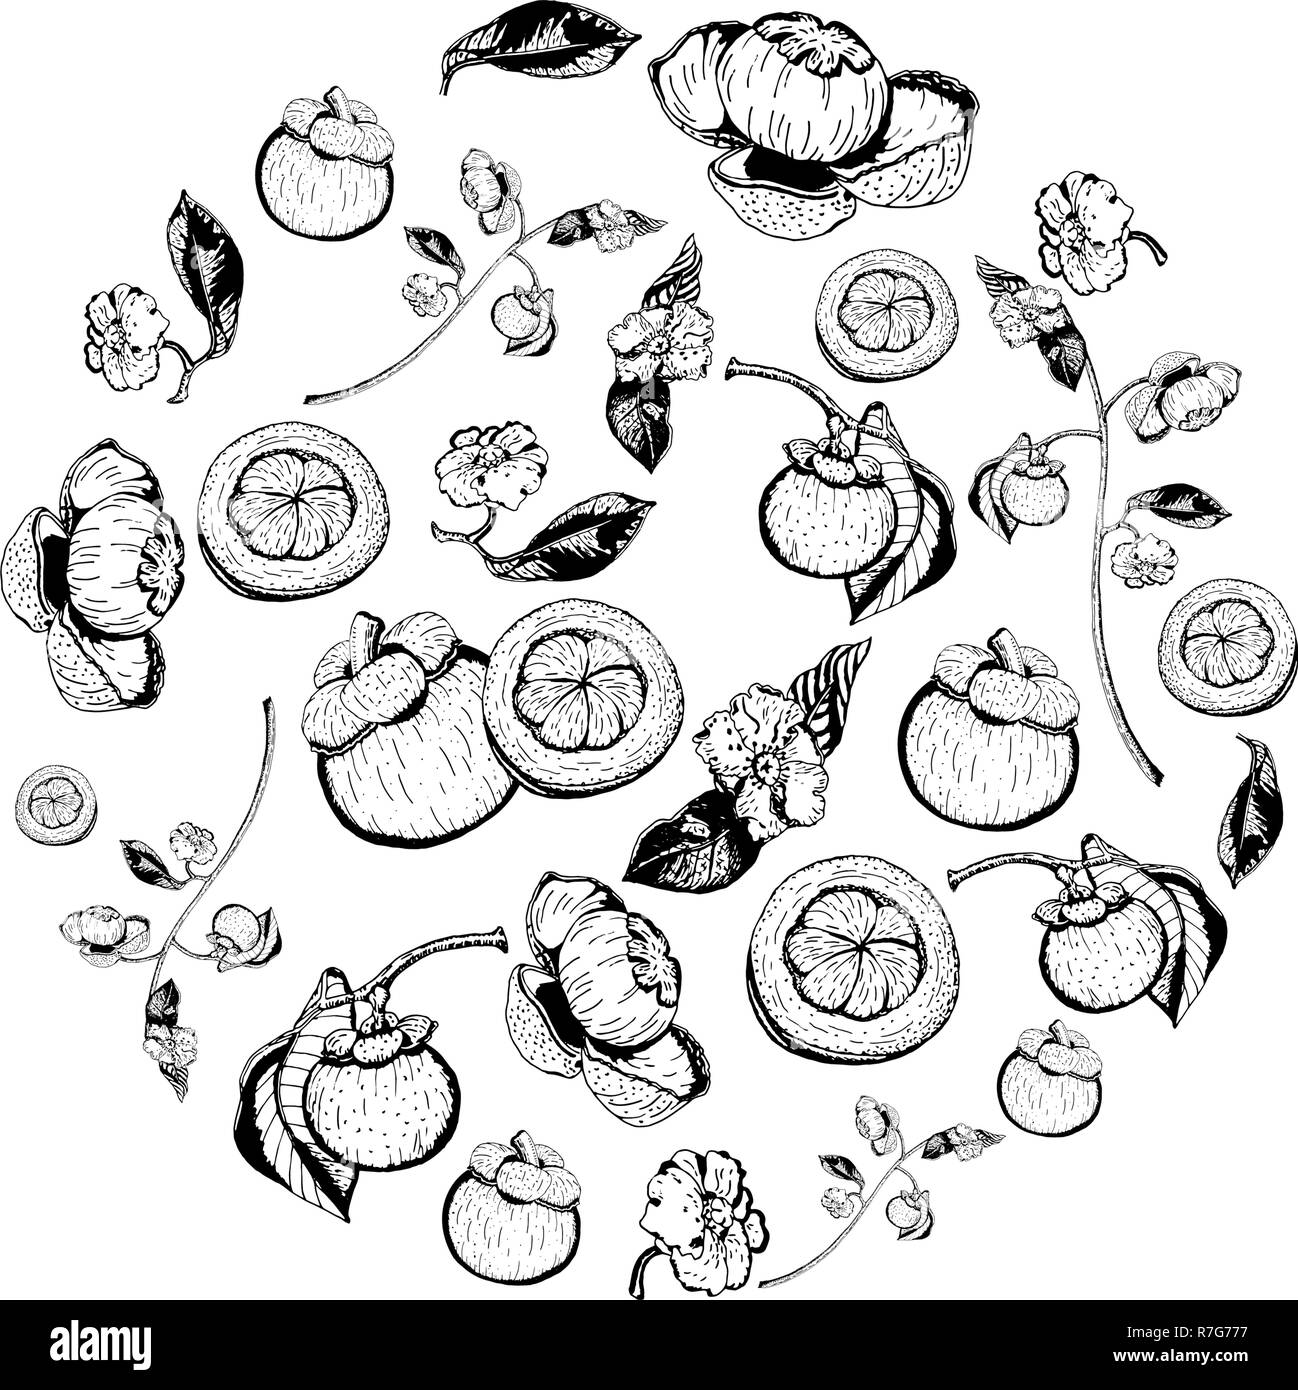 Purple mangosteen fruits, flowers, and leaves items composed in circle shape on white background. Tasty sweet garcinia mangostana hand drawn in black  Stock Vector